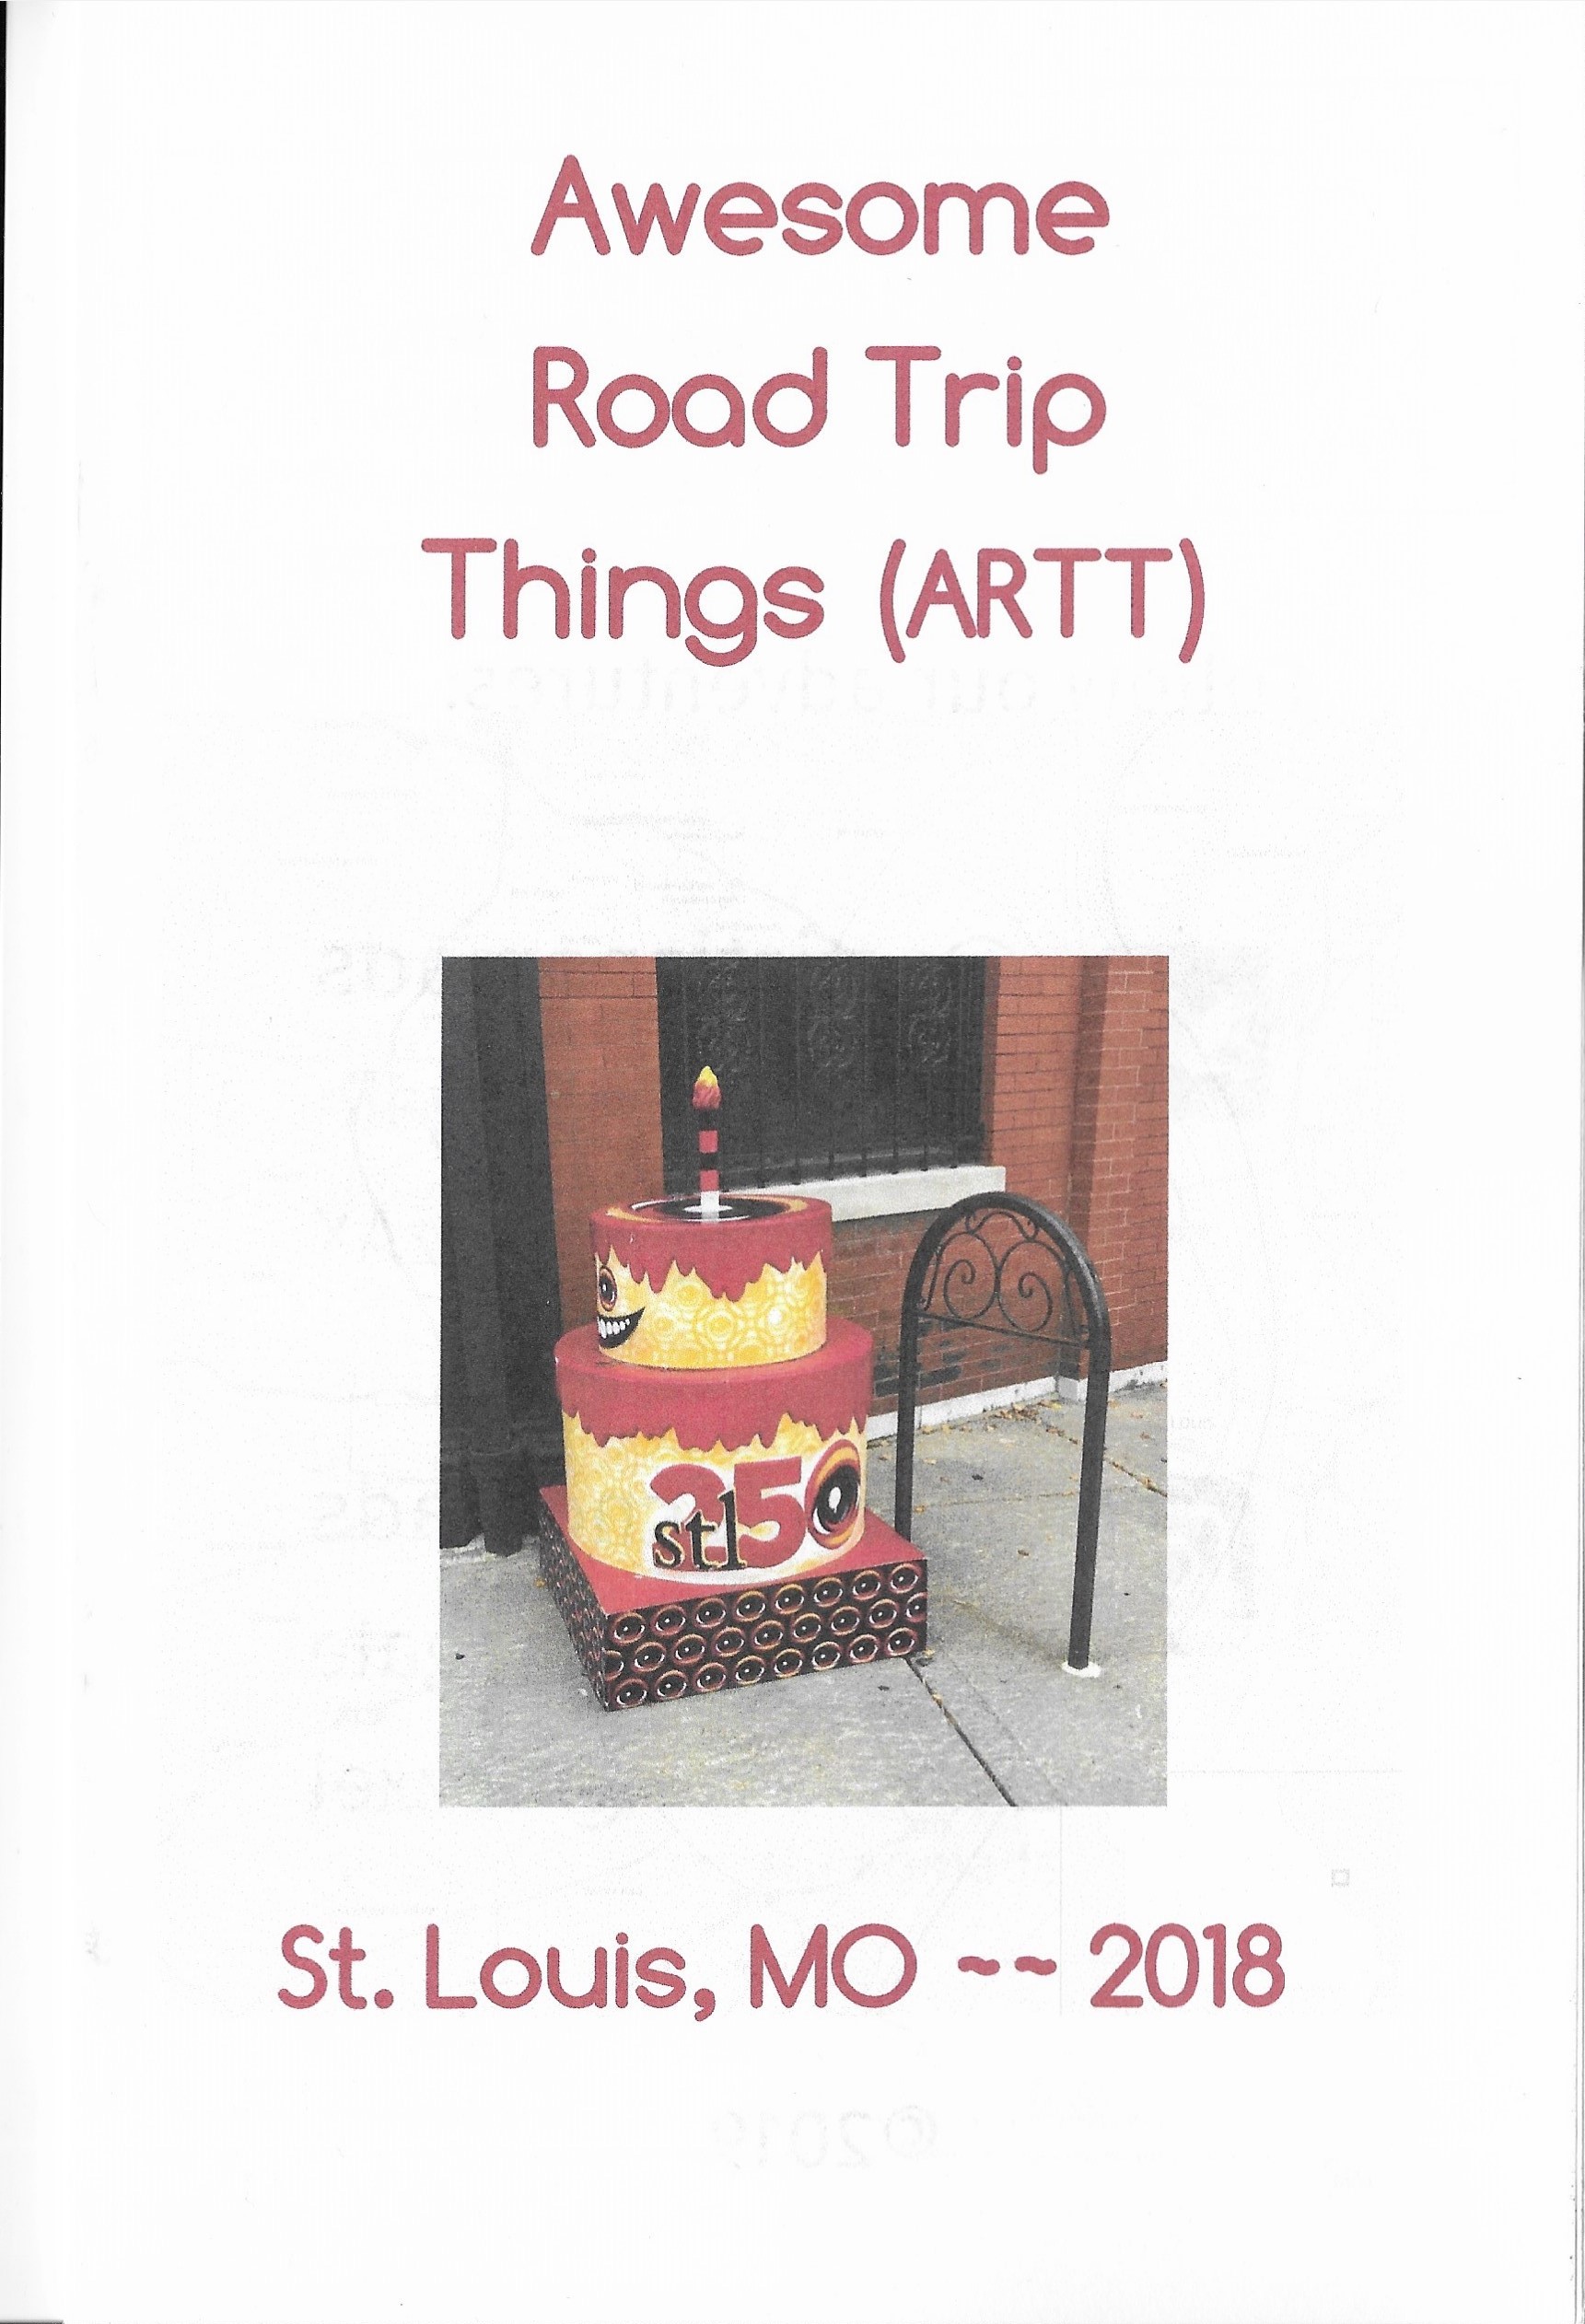 Awesome Road Trip Things from St. Louis MO, During our road trips we blogged on Instagram all the awesome road trip things we found. Then we turned this into a Zine. This zine is a collection of memories from St. Louis Mo. copyright Artistic Nomads 2018 2018,